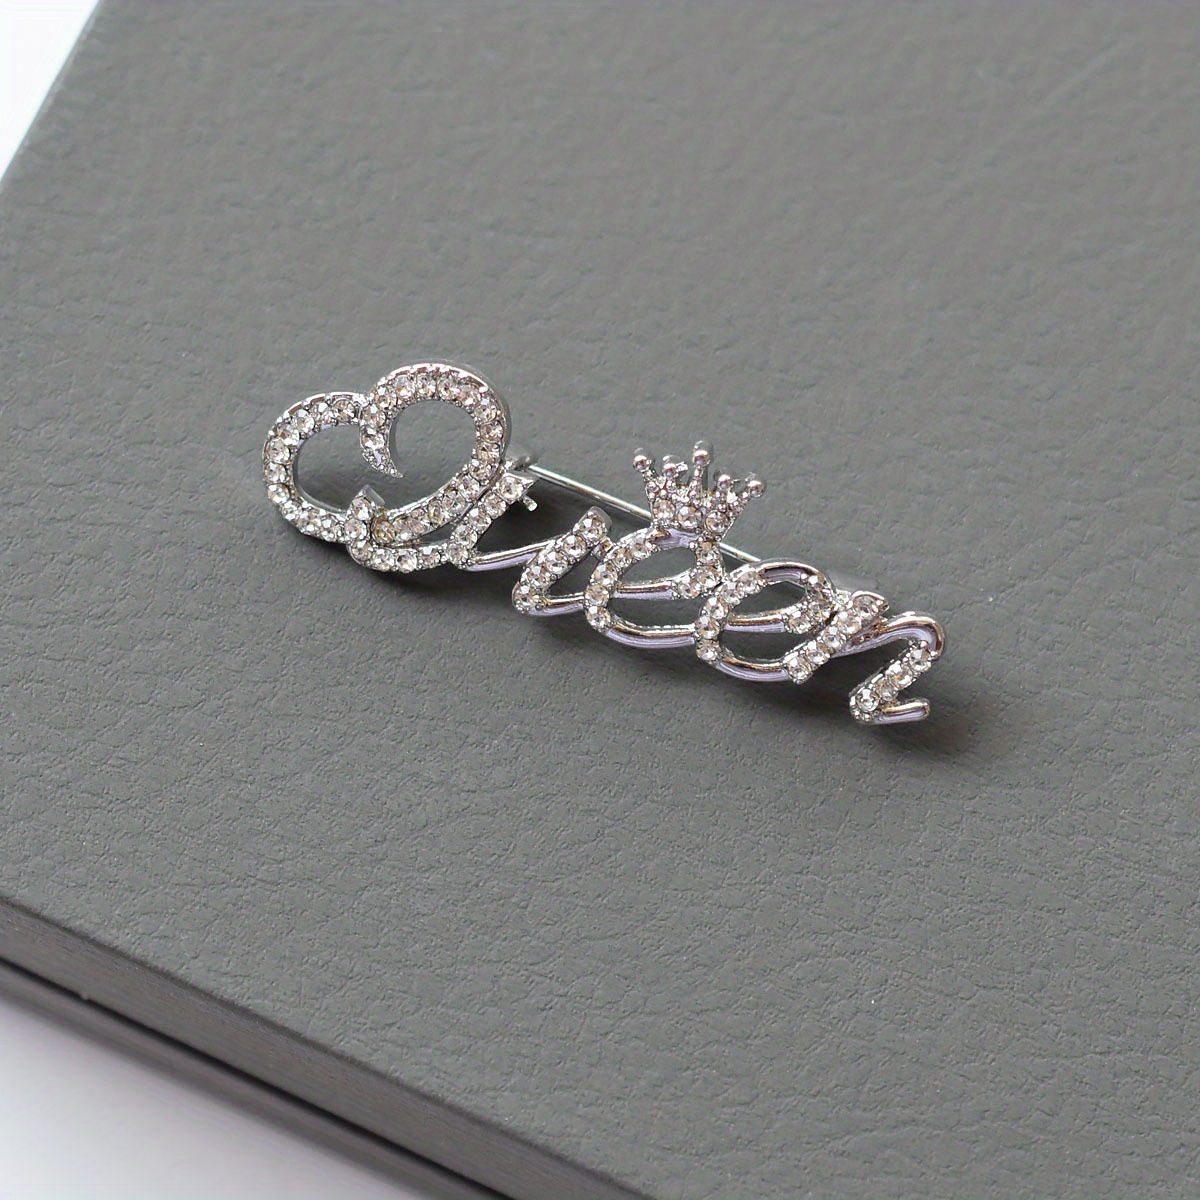 Exquisite Crown Brooches Pins Beautiful High Quality Crystal Brooch Pins  For Women Fashion Jewelry Christmas Brooches From Goodlinessjew, $1.11